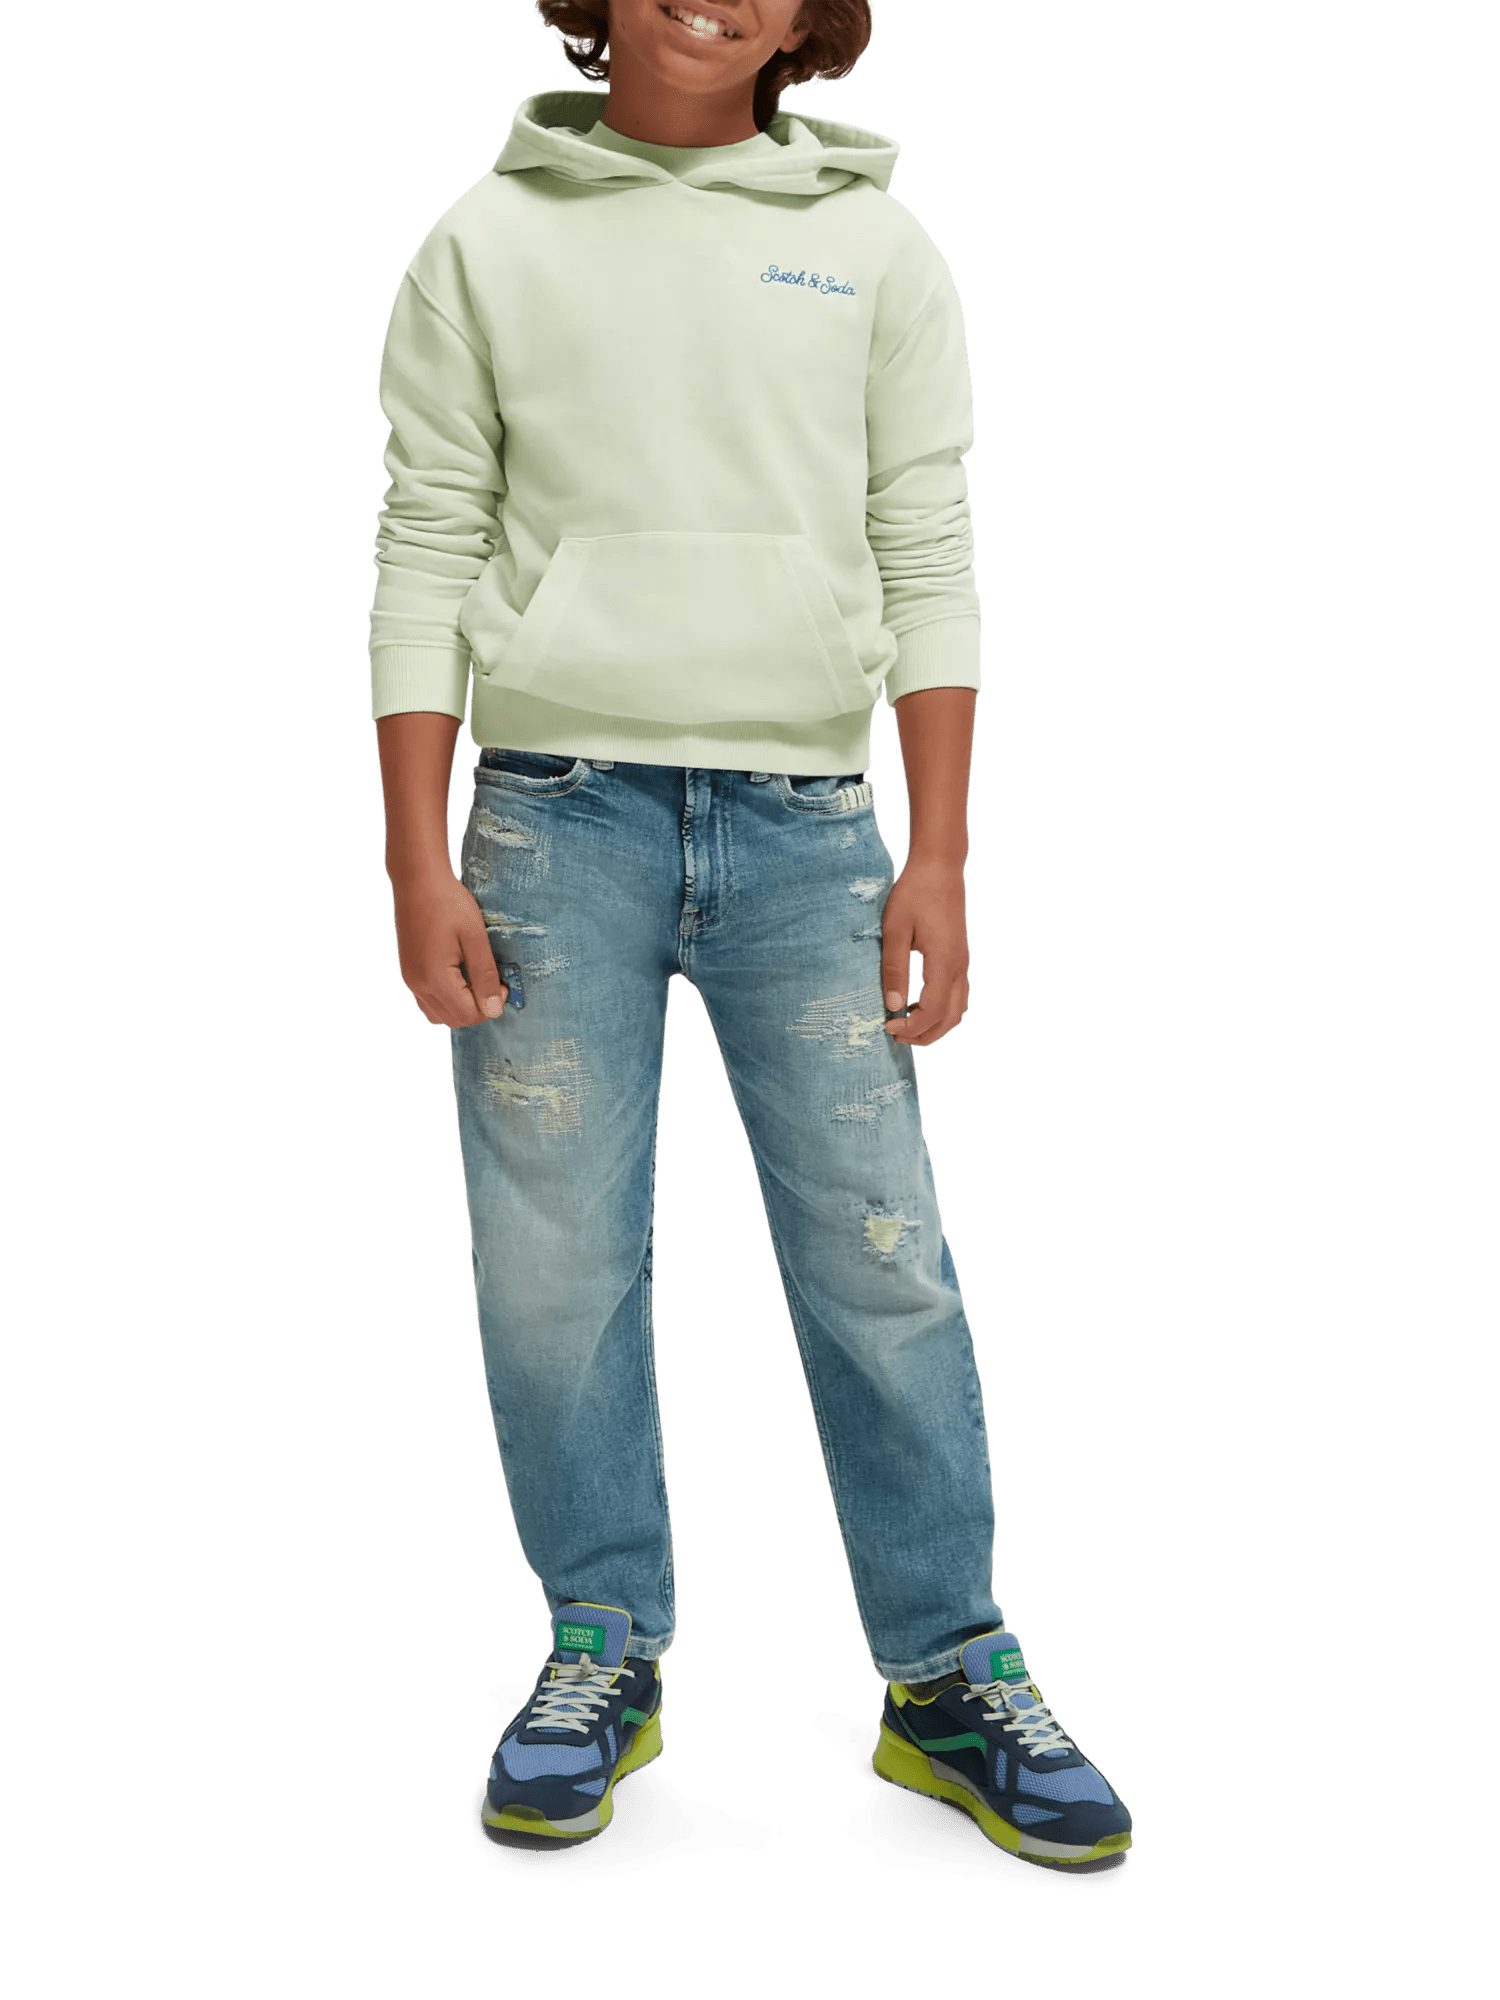 Scotch & Soda Cotton In Conversion Natural Garment-dyed hoodie NHD-FNT